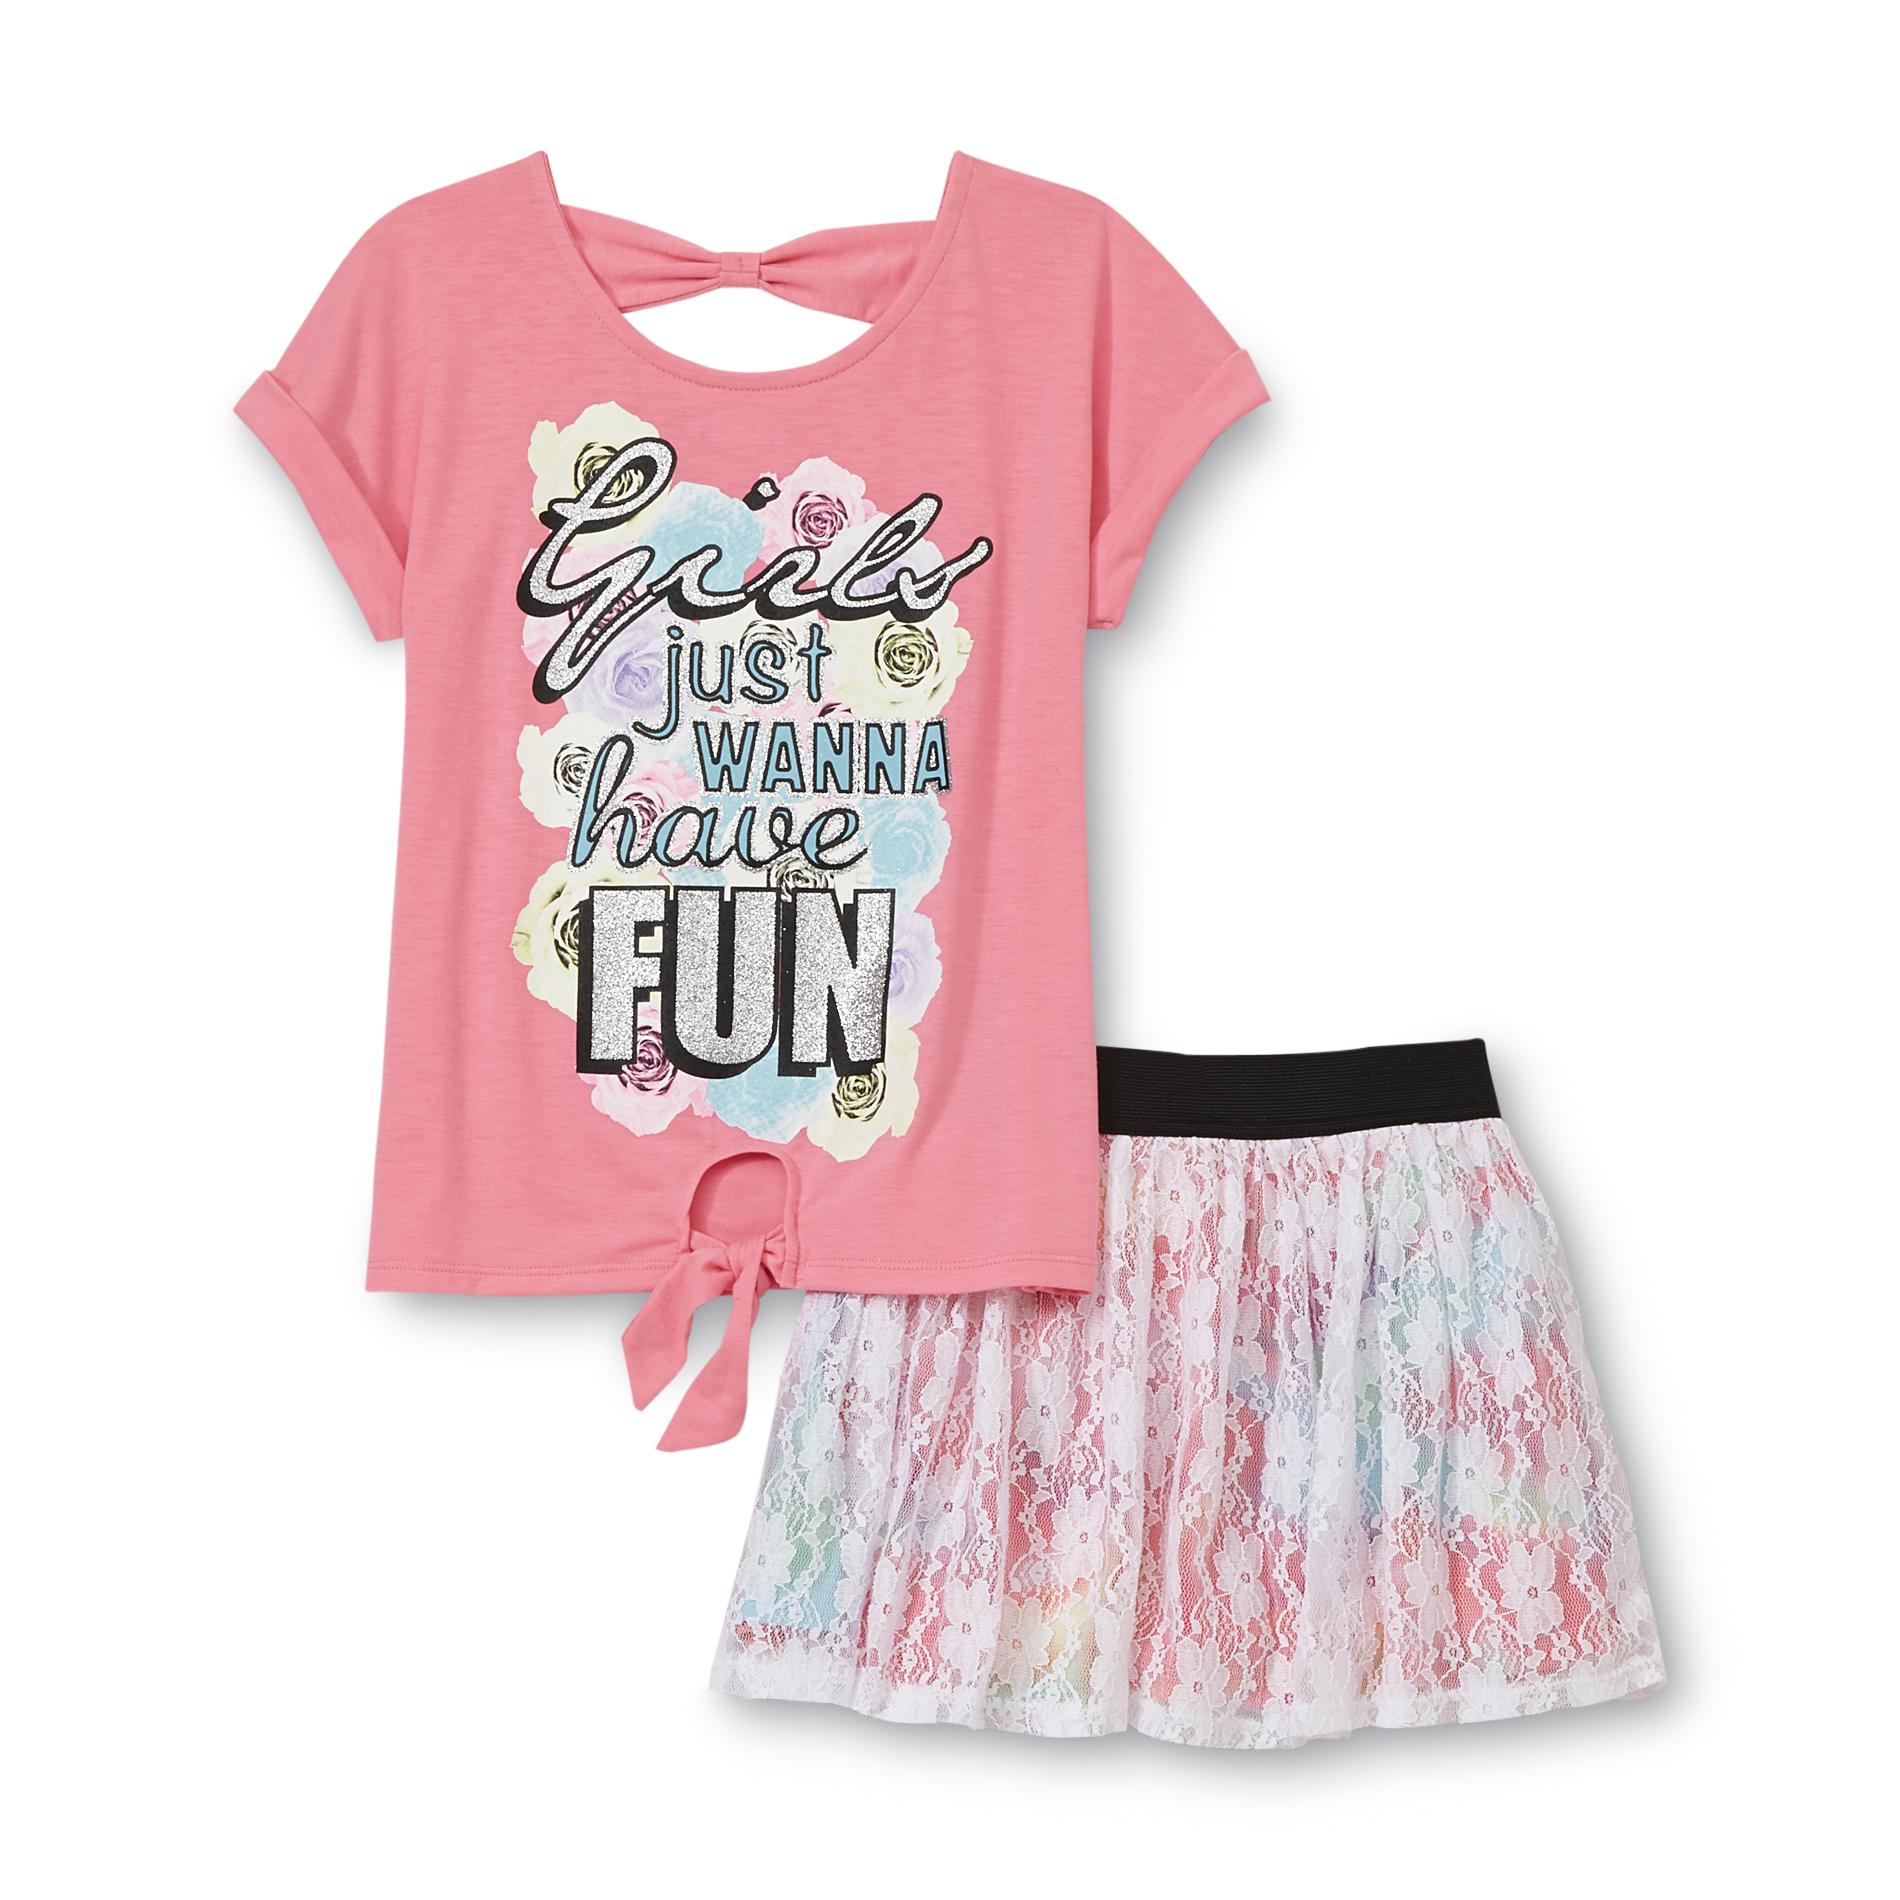 Piper Girl's Graphic T-Shirt & Skirt - Girls Just Wanna Have Fun